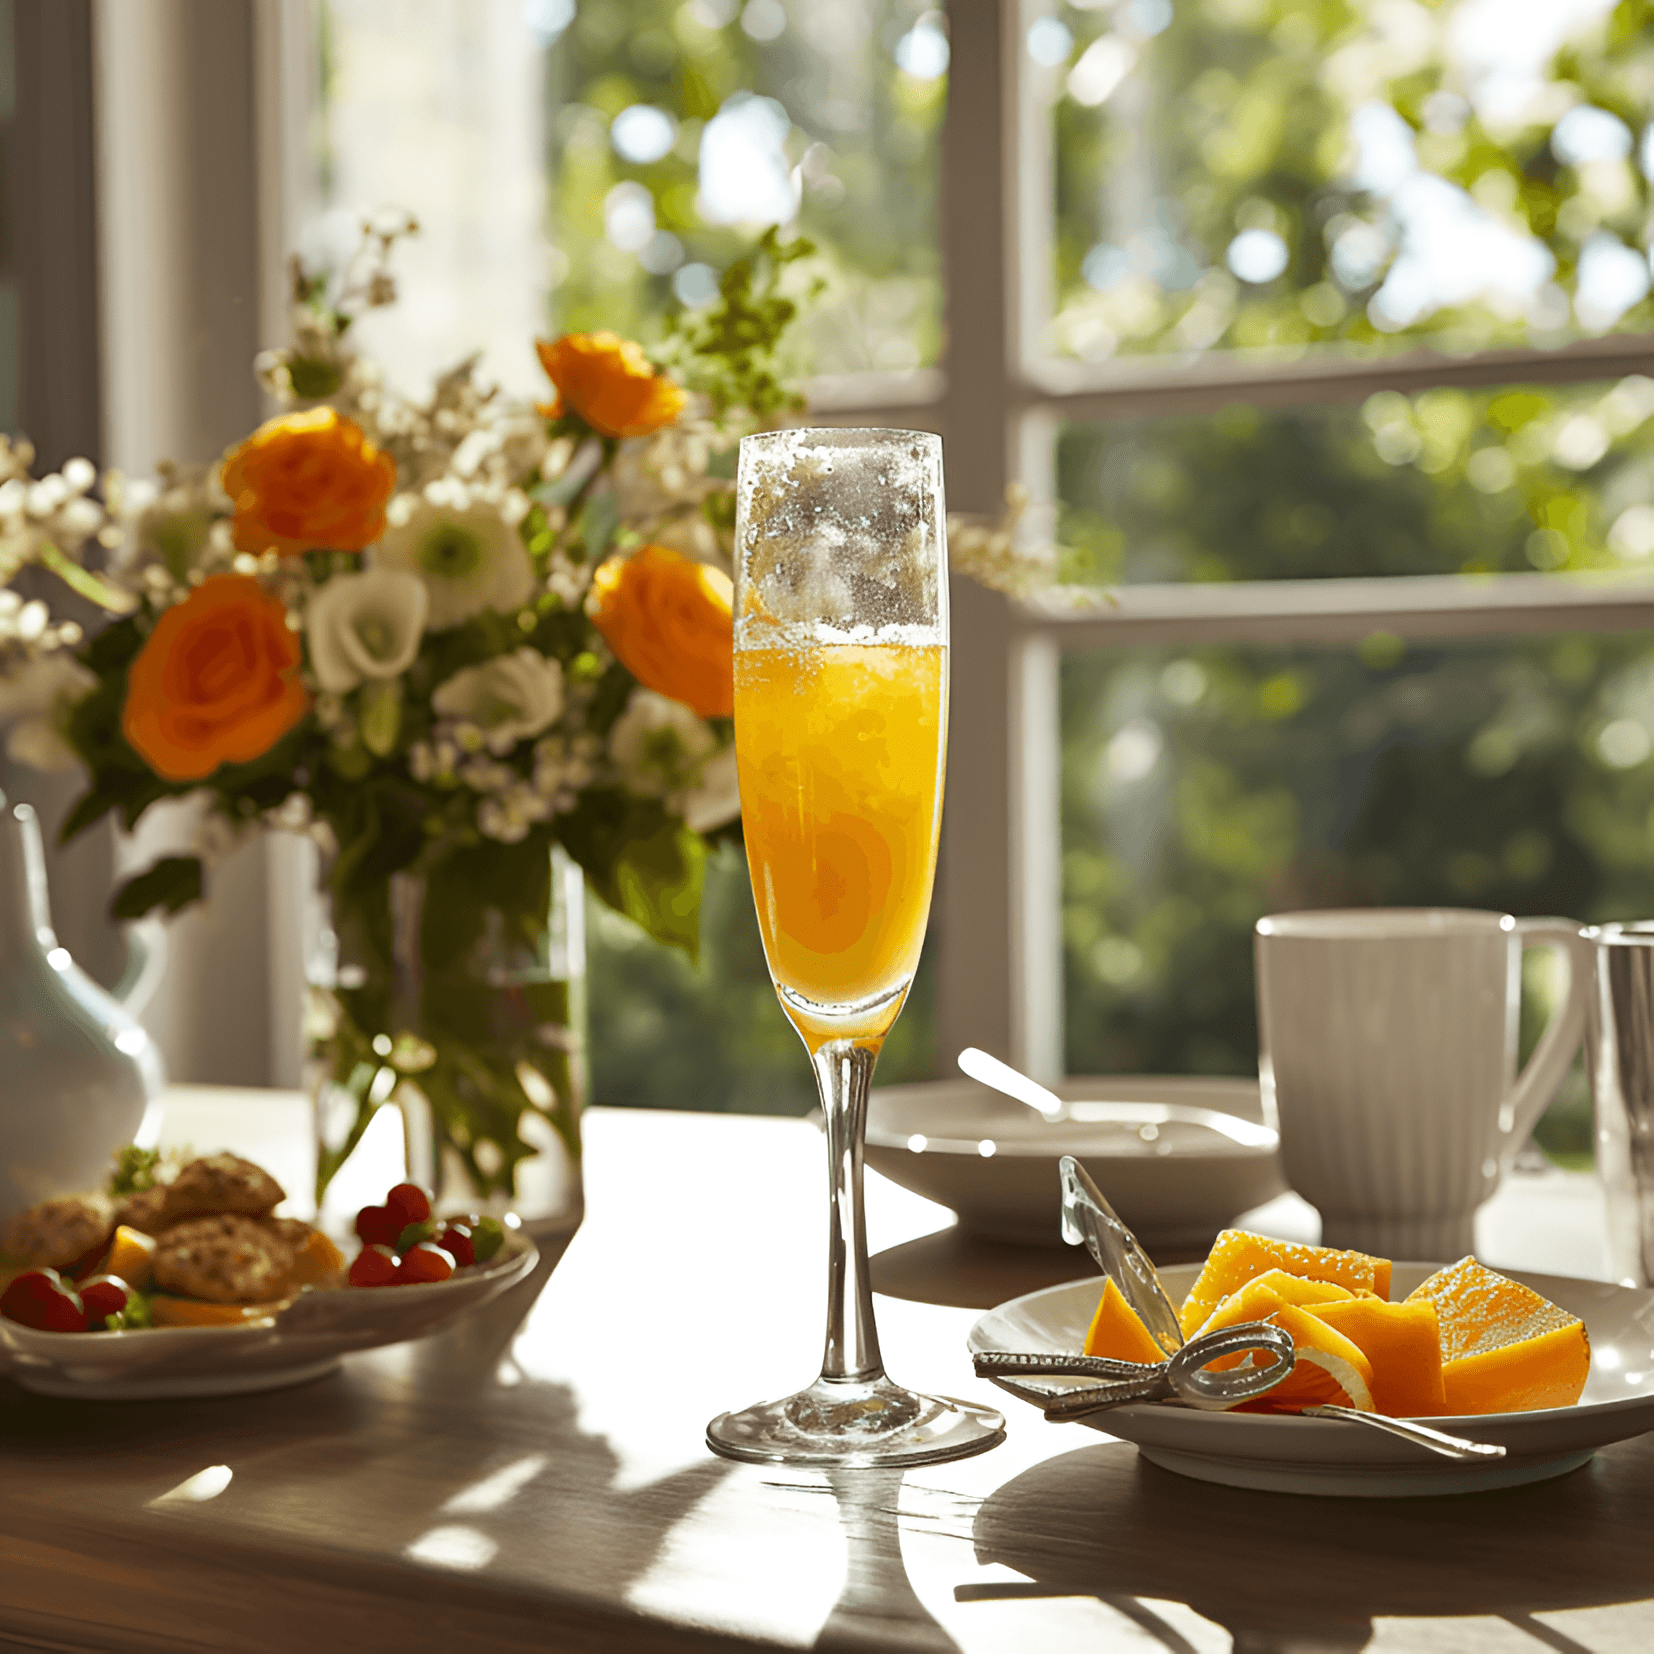 Mimosa Cocktail Recipe - The Mimosa has a refreshing, light, and fruity taste. It is slightly sweet with a hint of tartness from the orange juice, and the sparkling wine adds a bubbly effervescence.